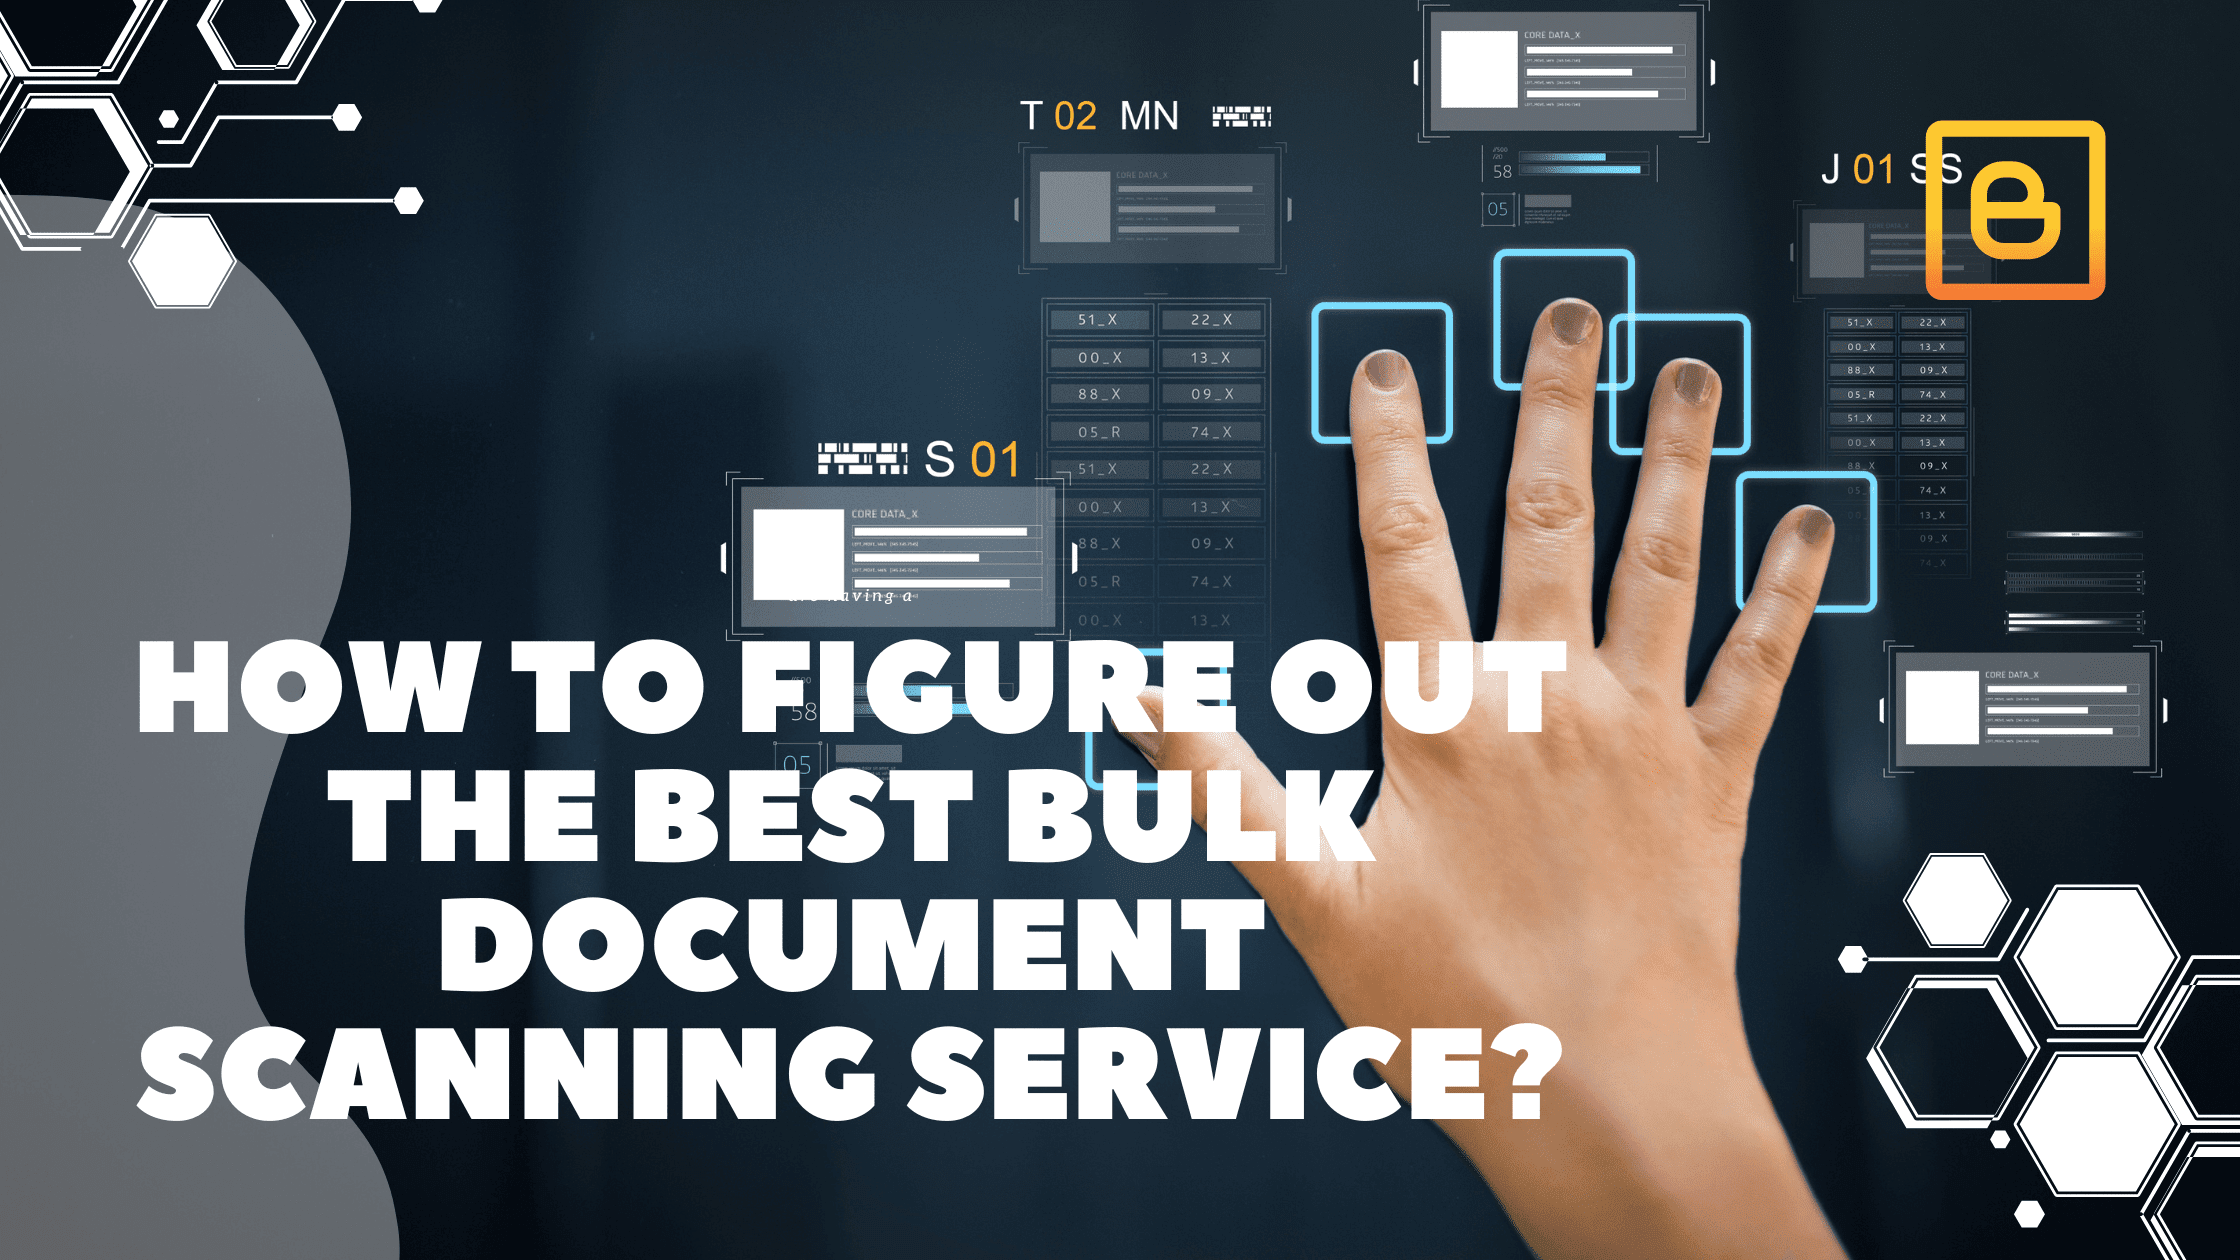 How to Figure Out the Best Bulk Document Scanning Service?